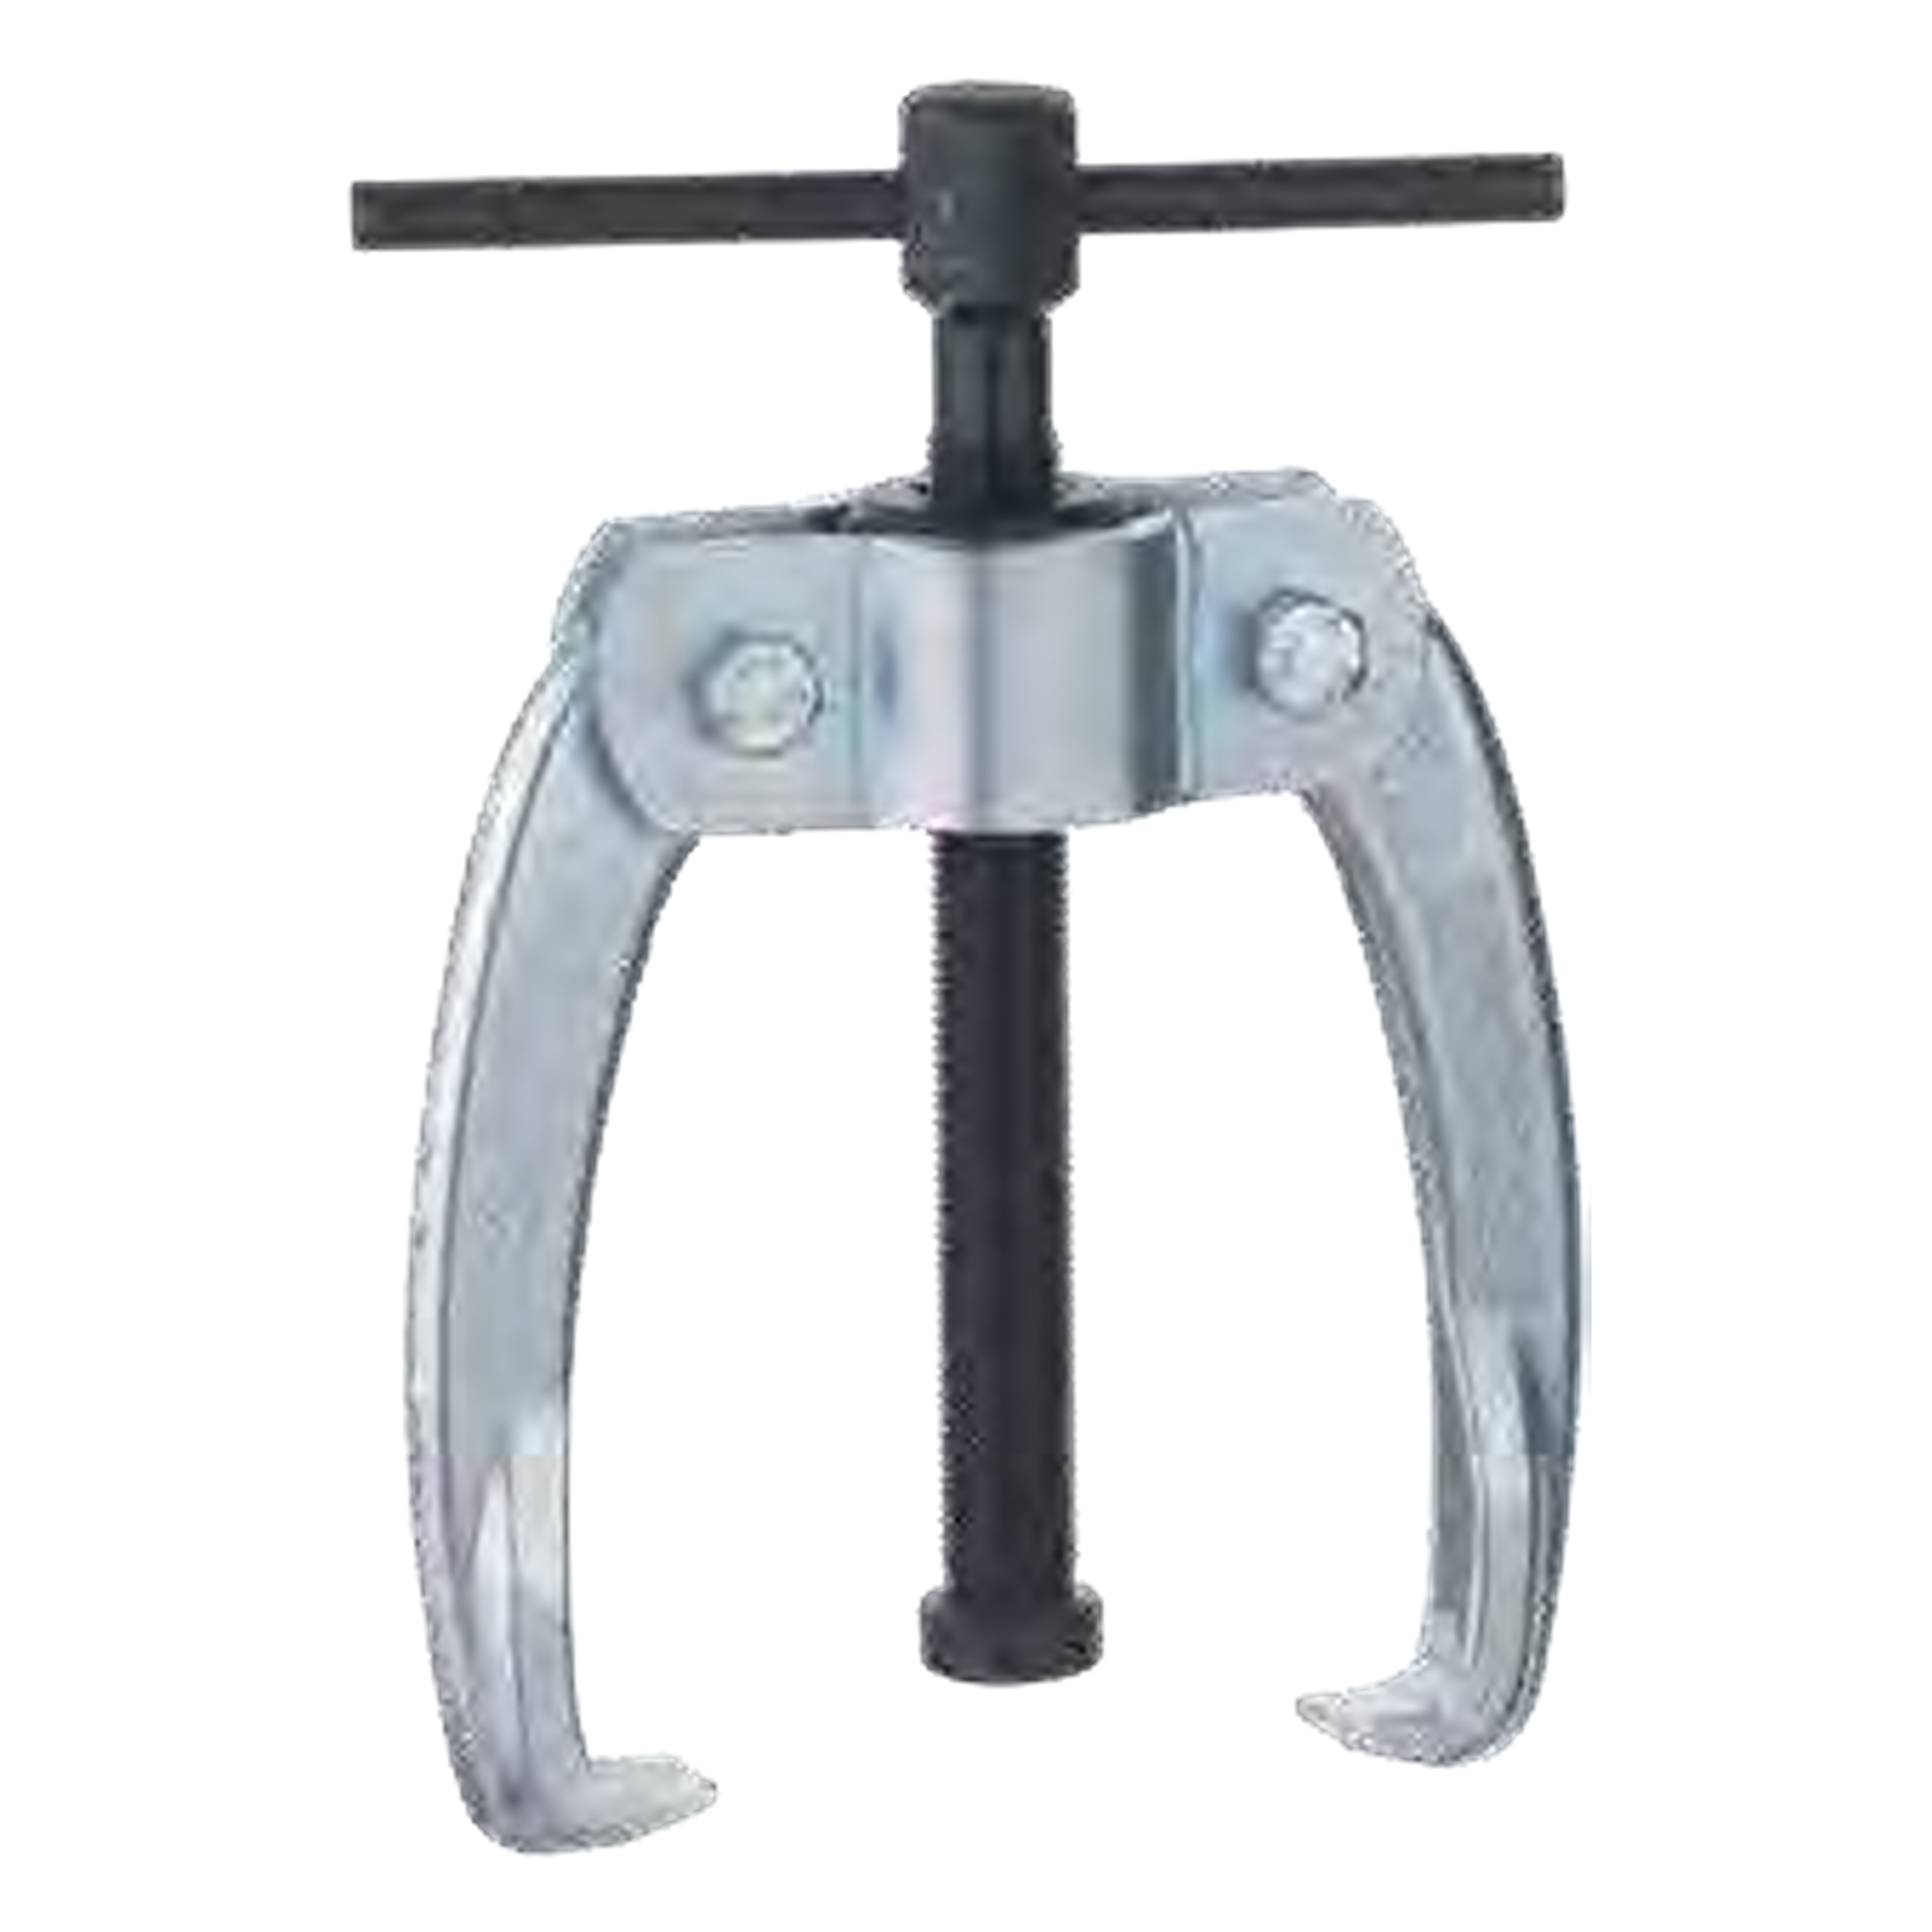 NEXUS 143 Universal-Puller Tee-Handled Edition, 3-Arms - Premium Mechanical Pullers from NEXUS - Shop now at Yew Aik.